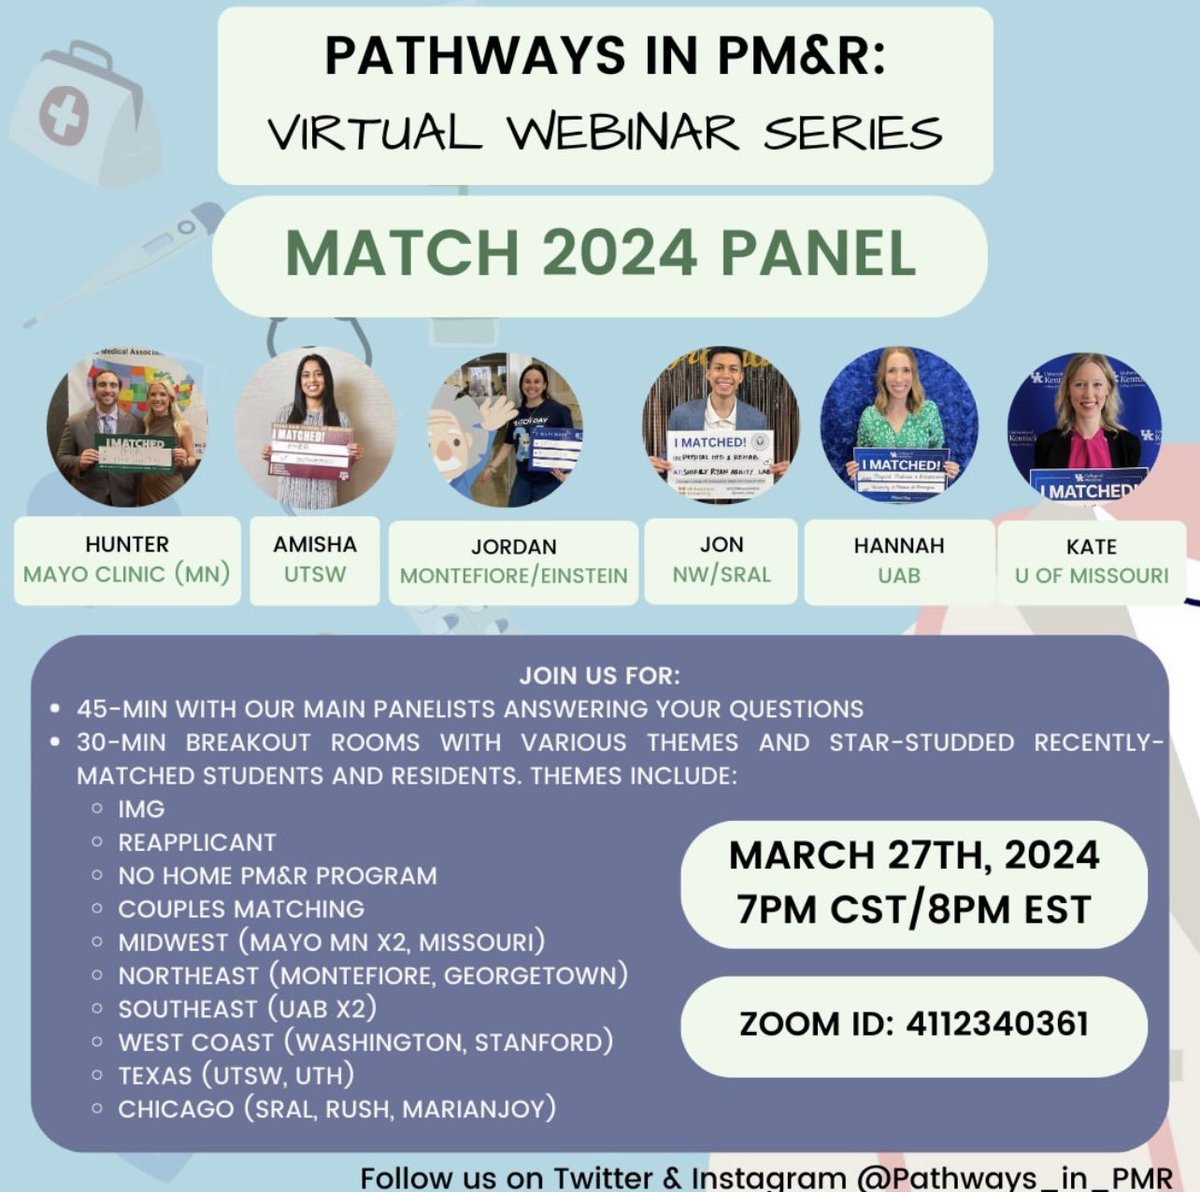 Come join us for our #Match2024 panel! We have incredible students and residents from all over the country ready to answer all of your questions! There will also be several themed rooms. Submit question for the main panel here: forms.gle/ZDoKuawjSdVBuW… #Physiatry #MedTwitter